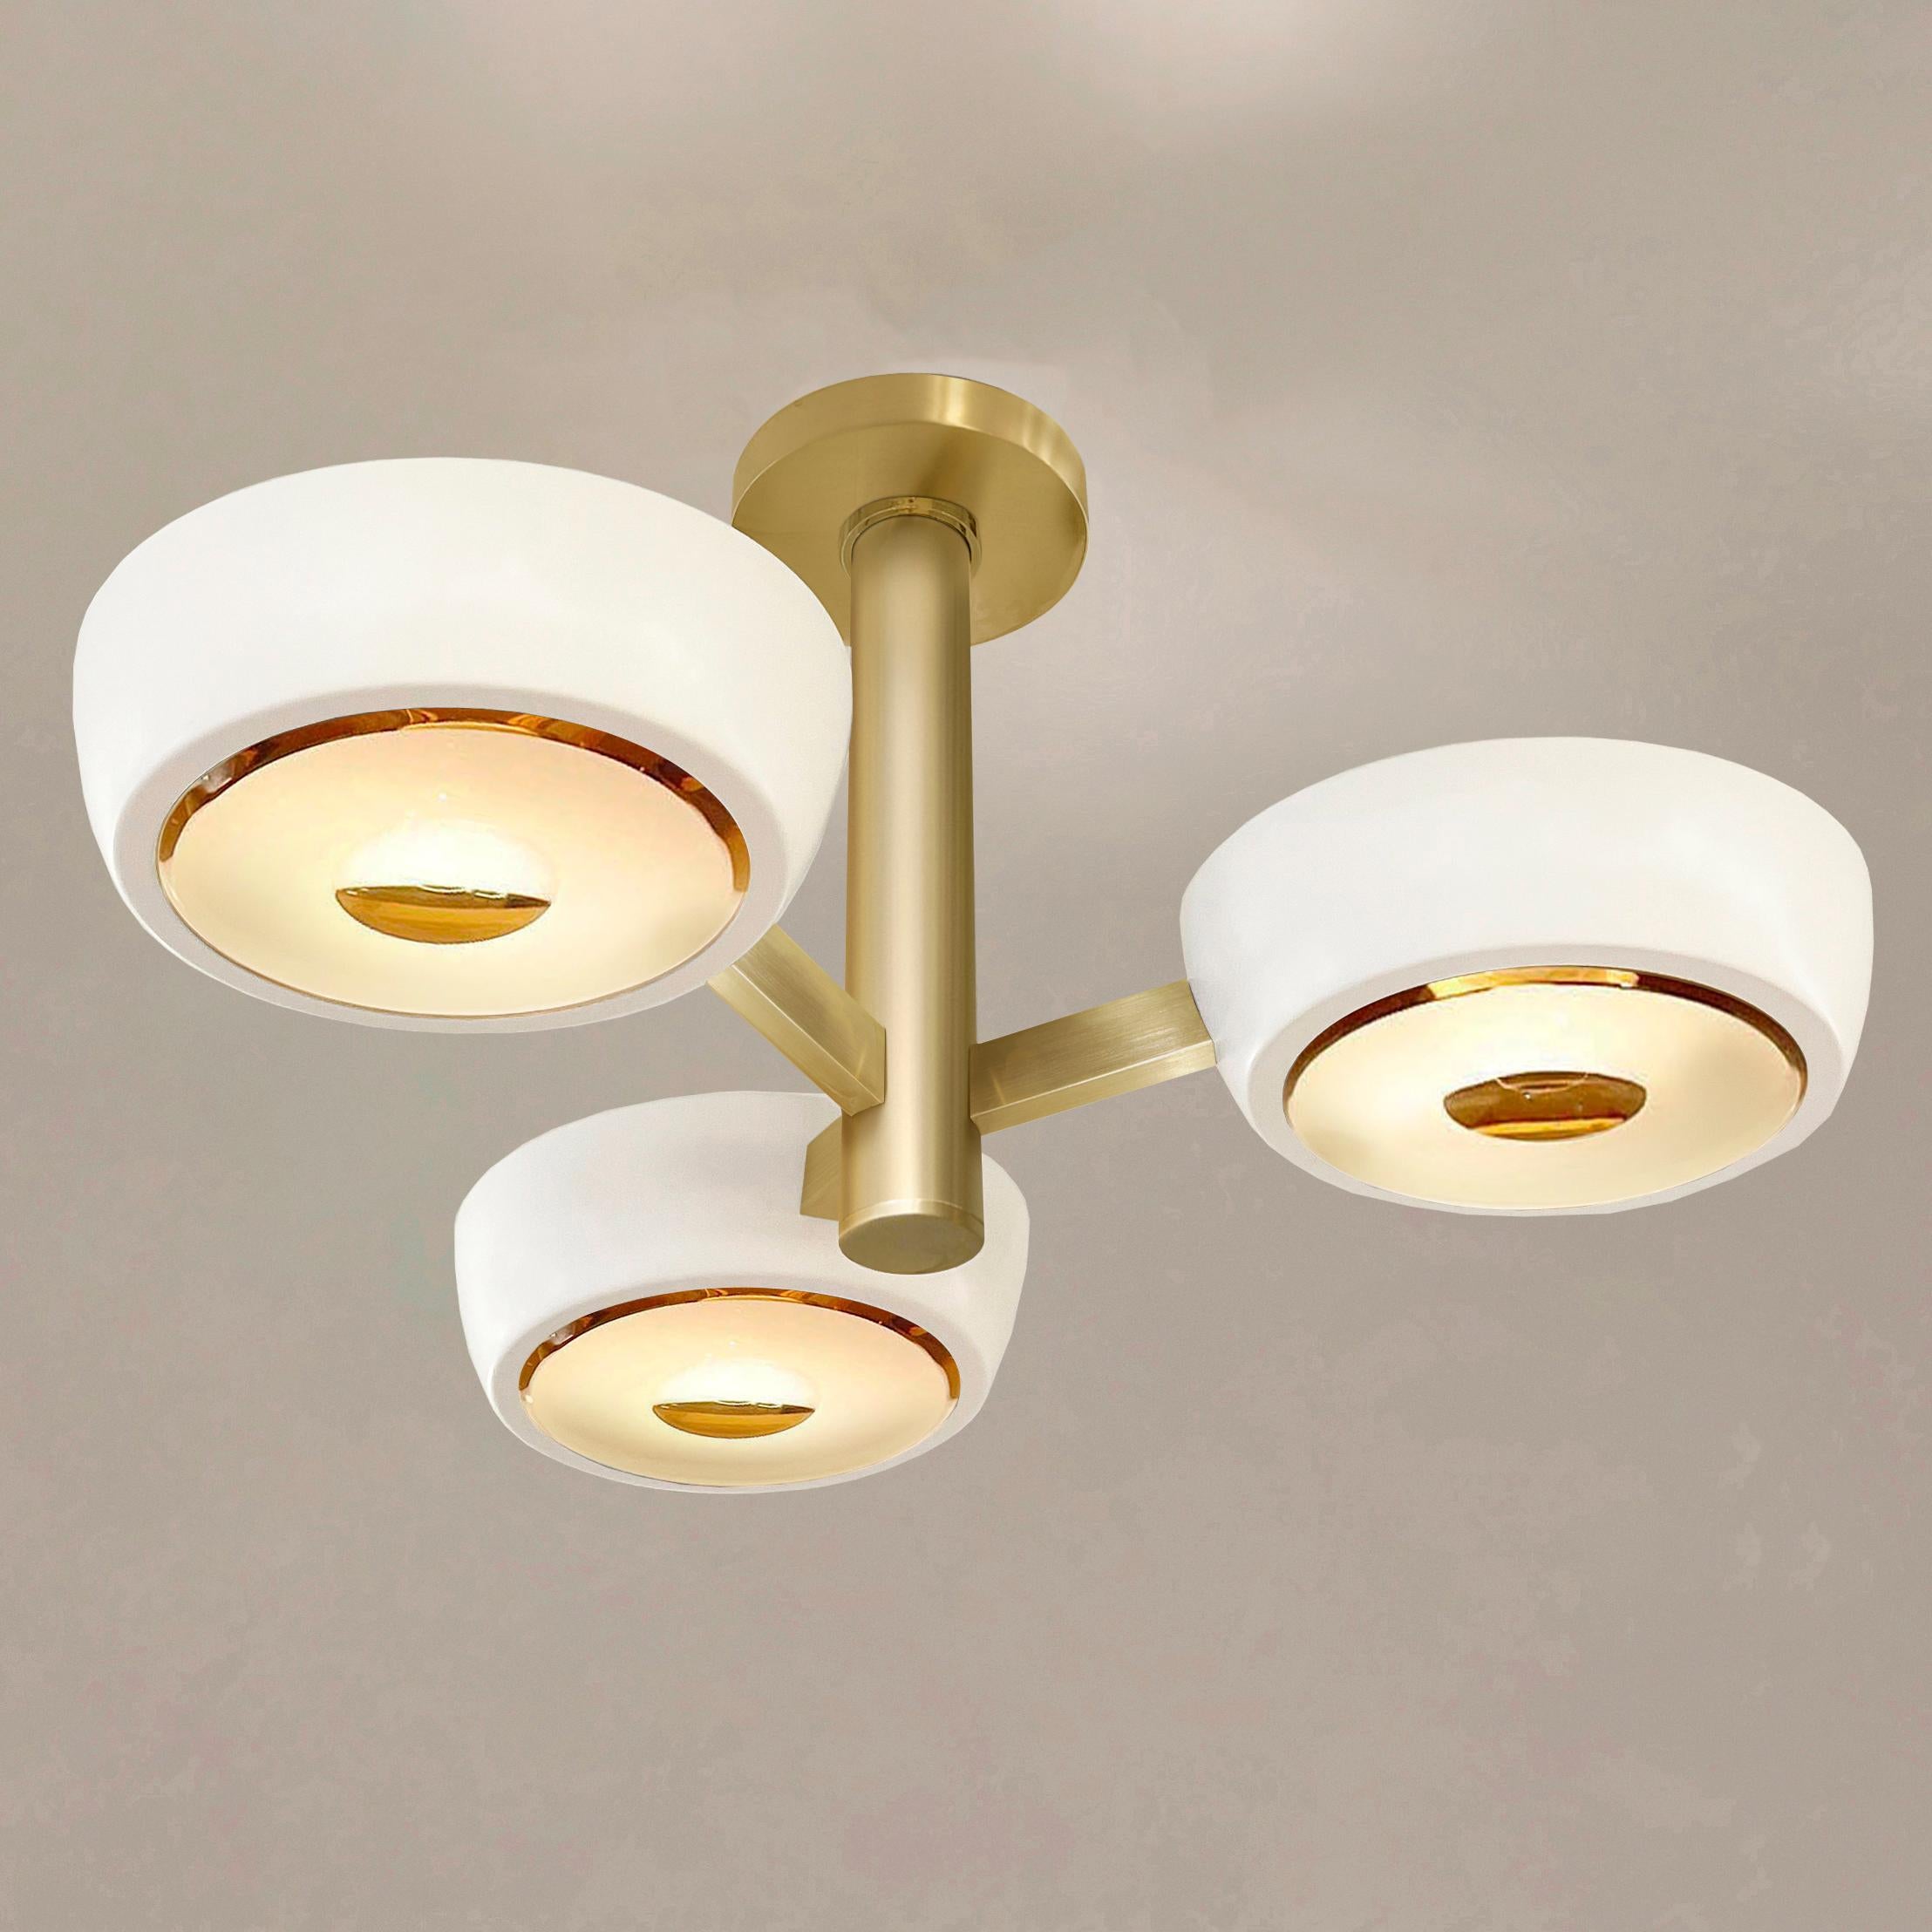 Brass Rose Piccolo Ceiling Light by Gaspare Asaro- Rose Glass and Bronze Finish For Sale